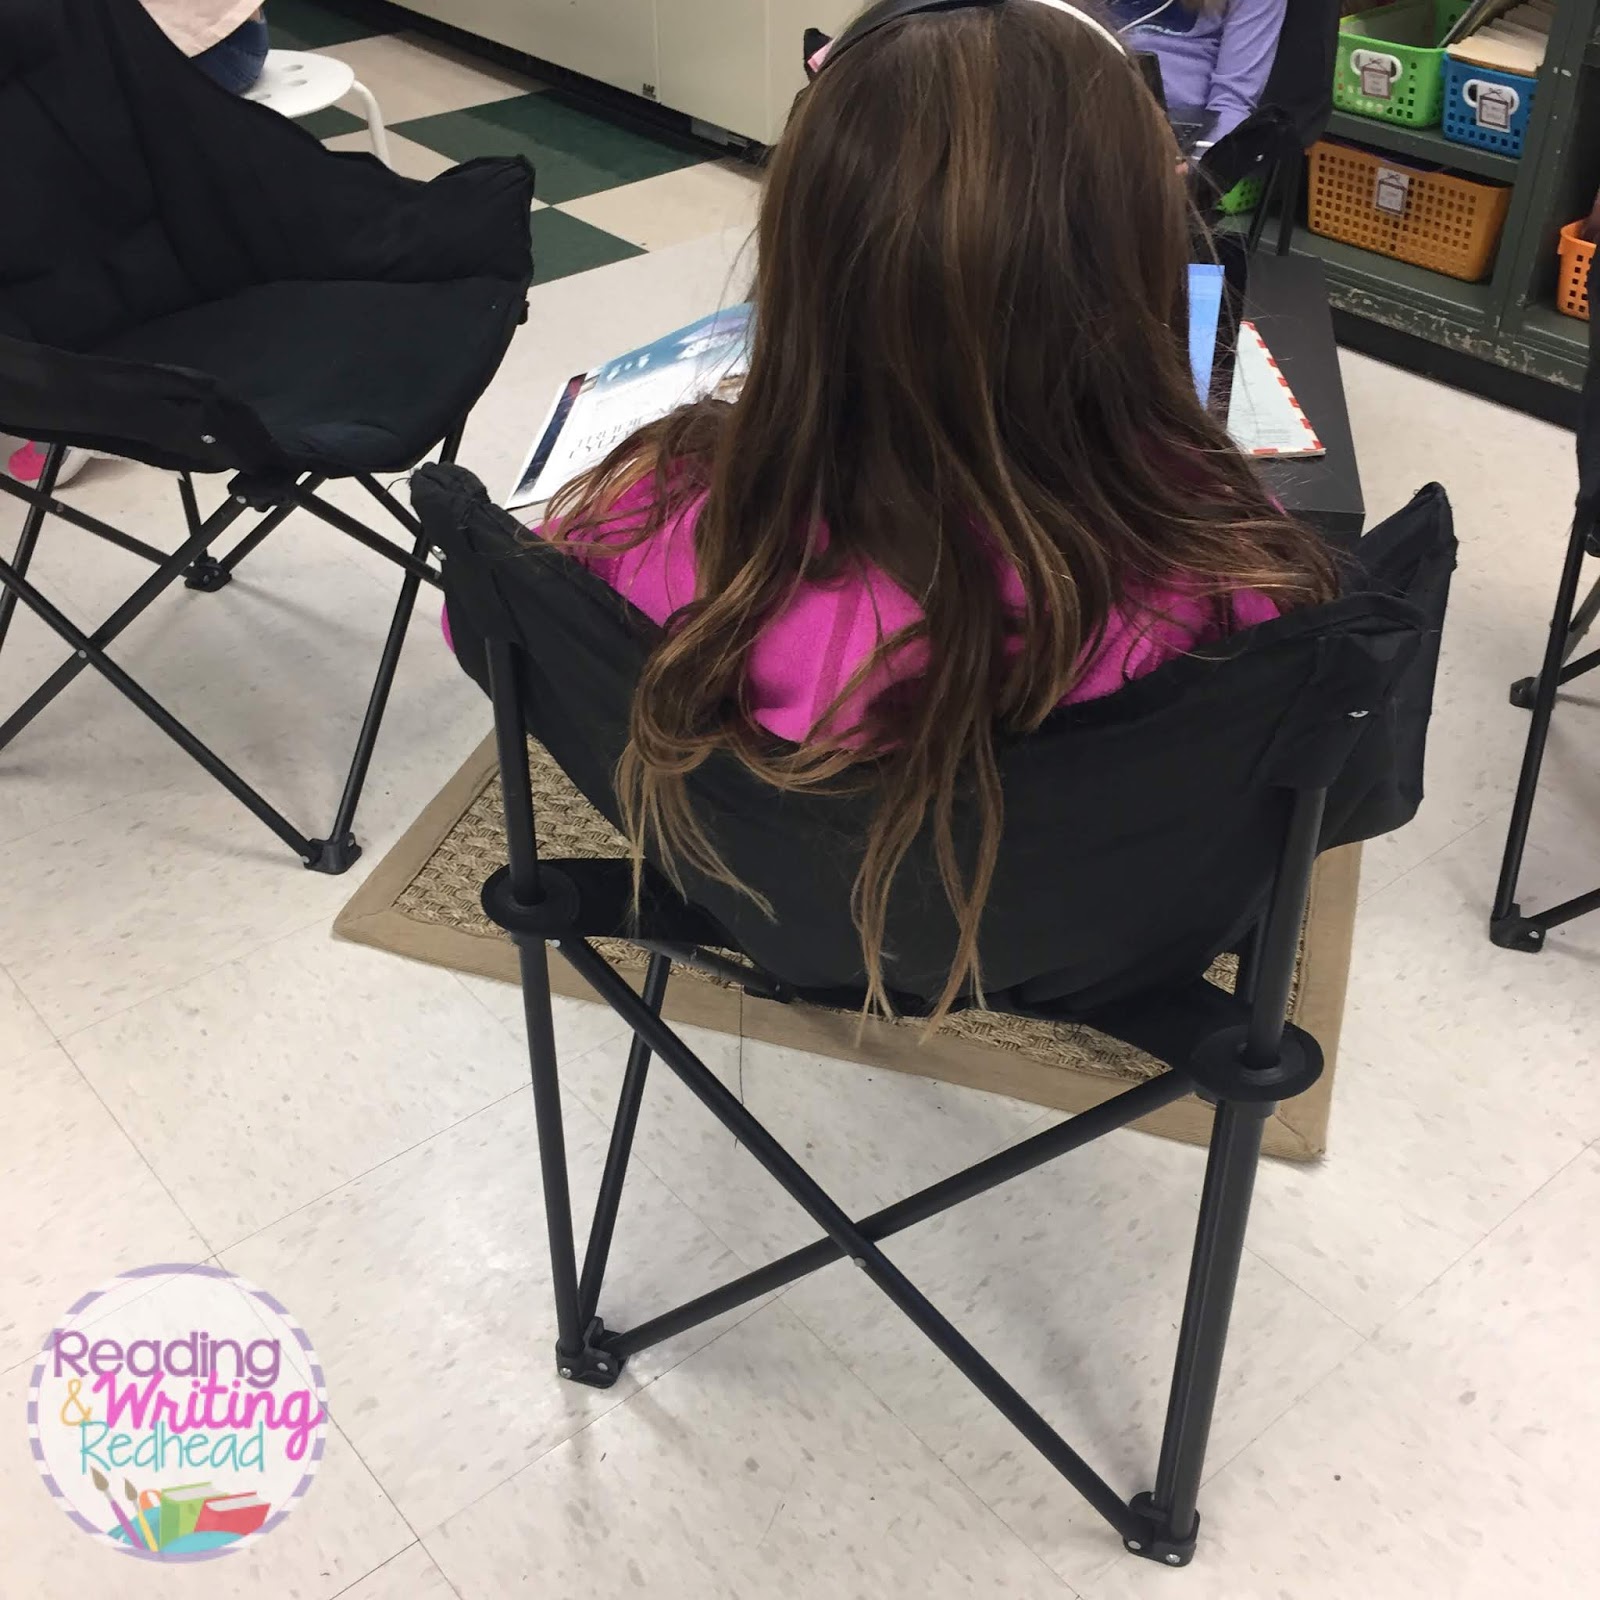 How to introduce flexible seating - ideas and tips !